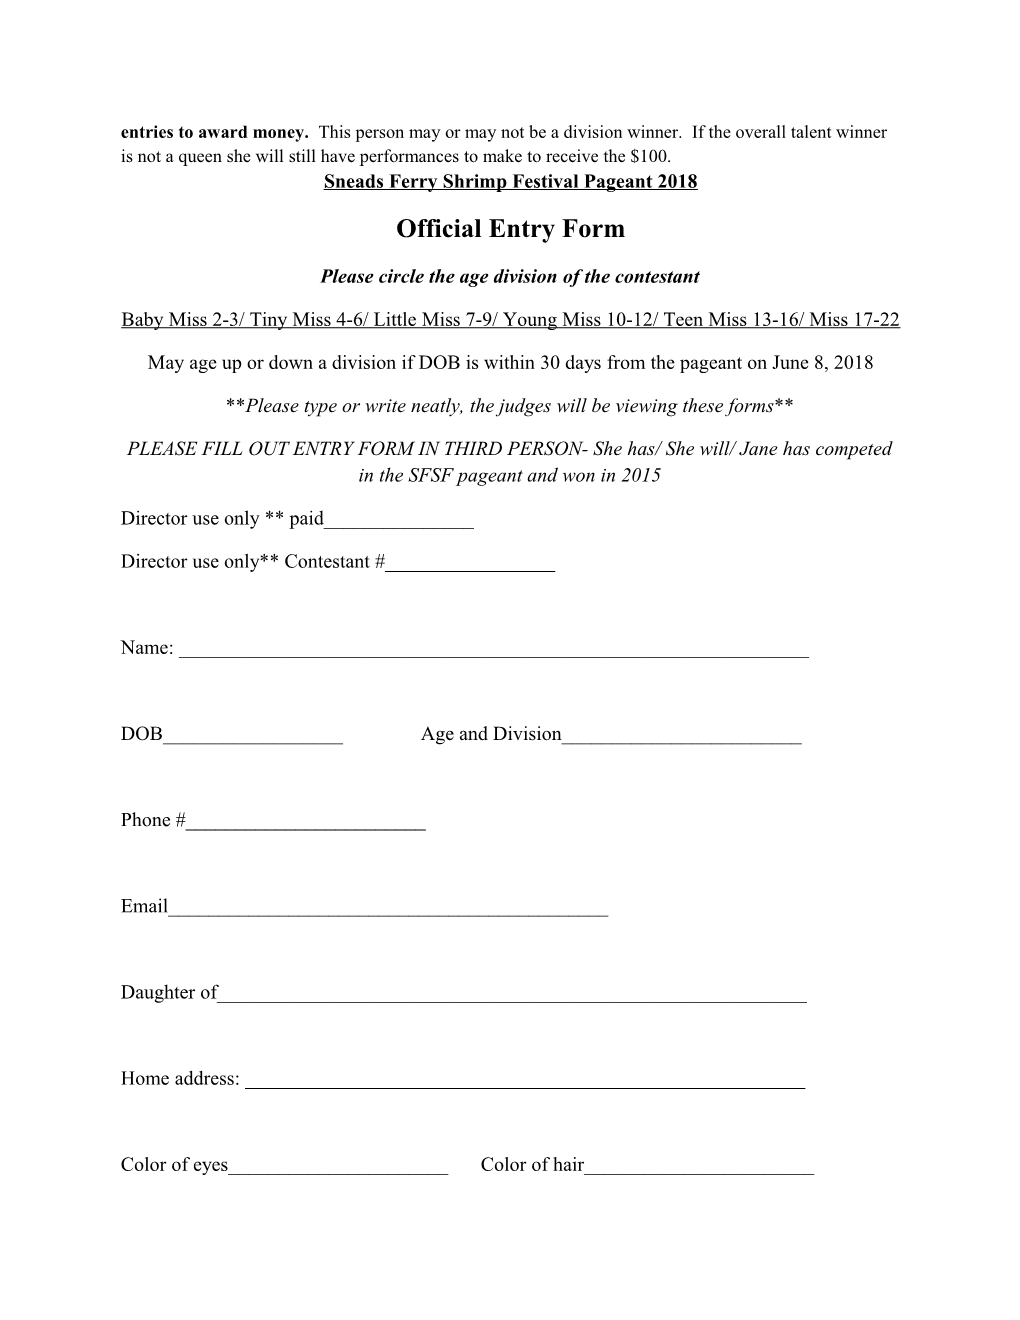 Sneads Ferry Shrimp Festival Queens Scholarship Pageant Application